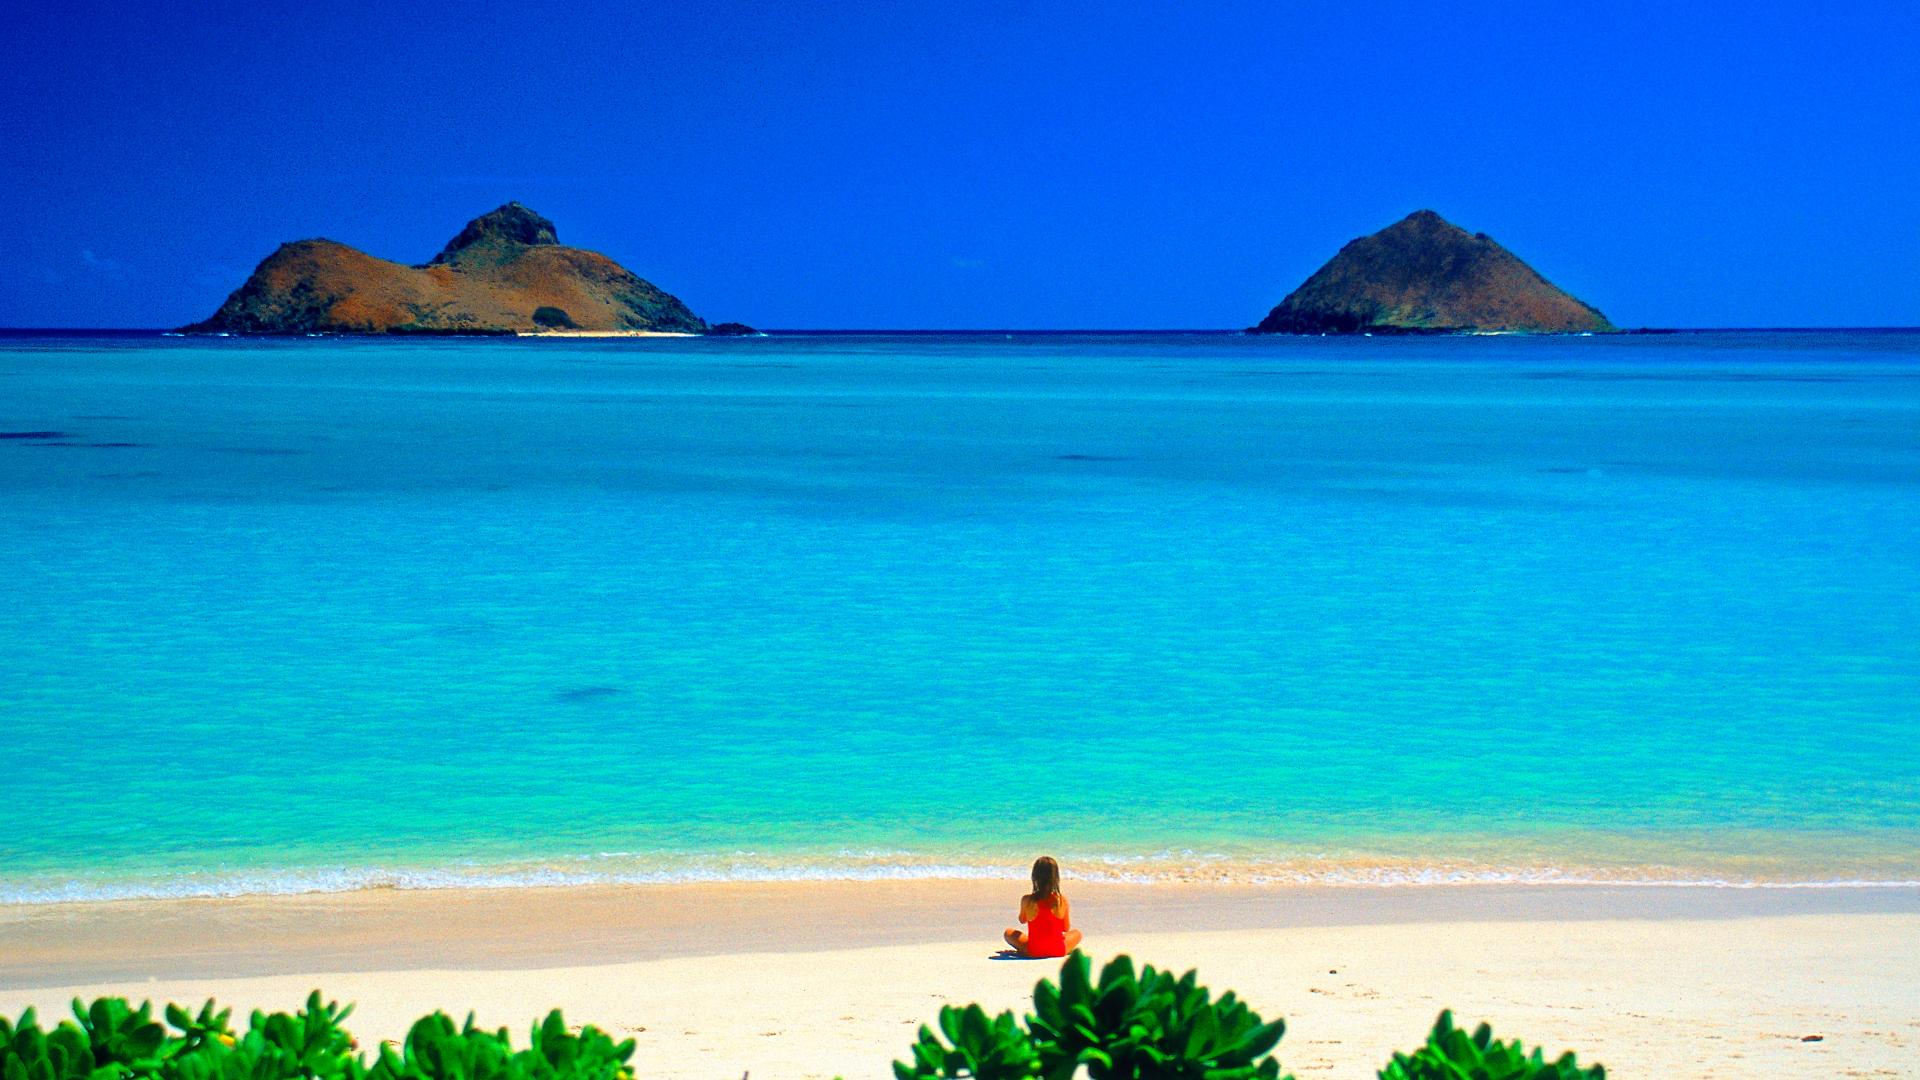  cool backgrounds beach hawaii 1920x1080px Wallpapers Full Size